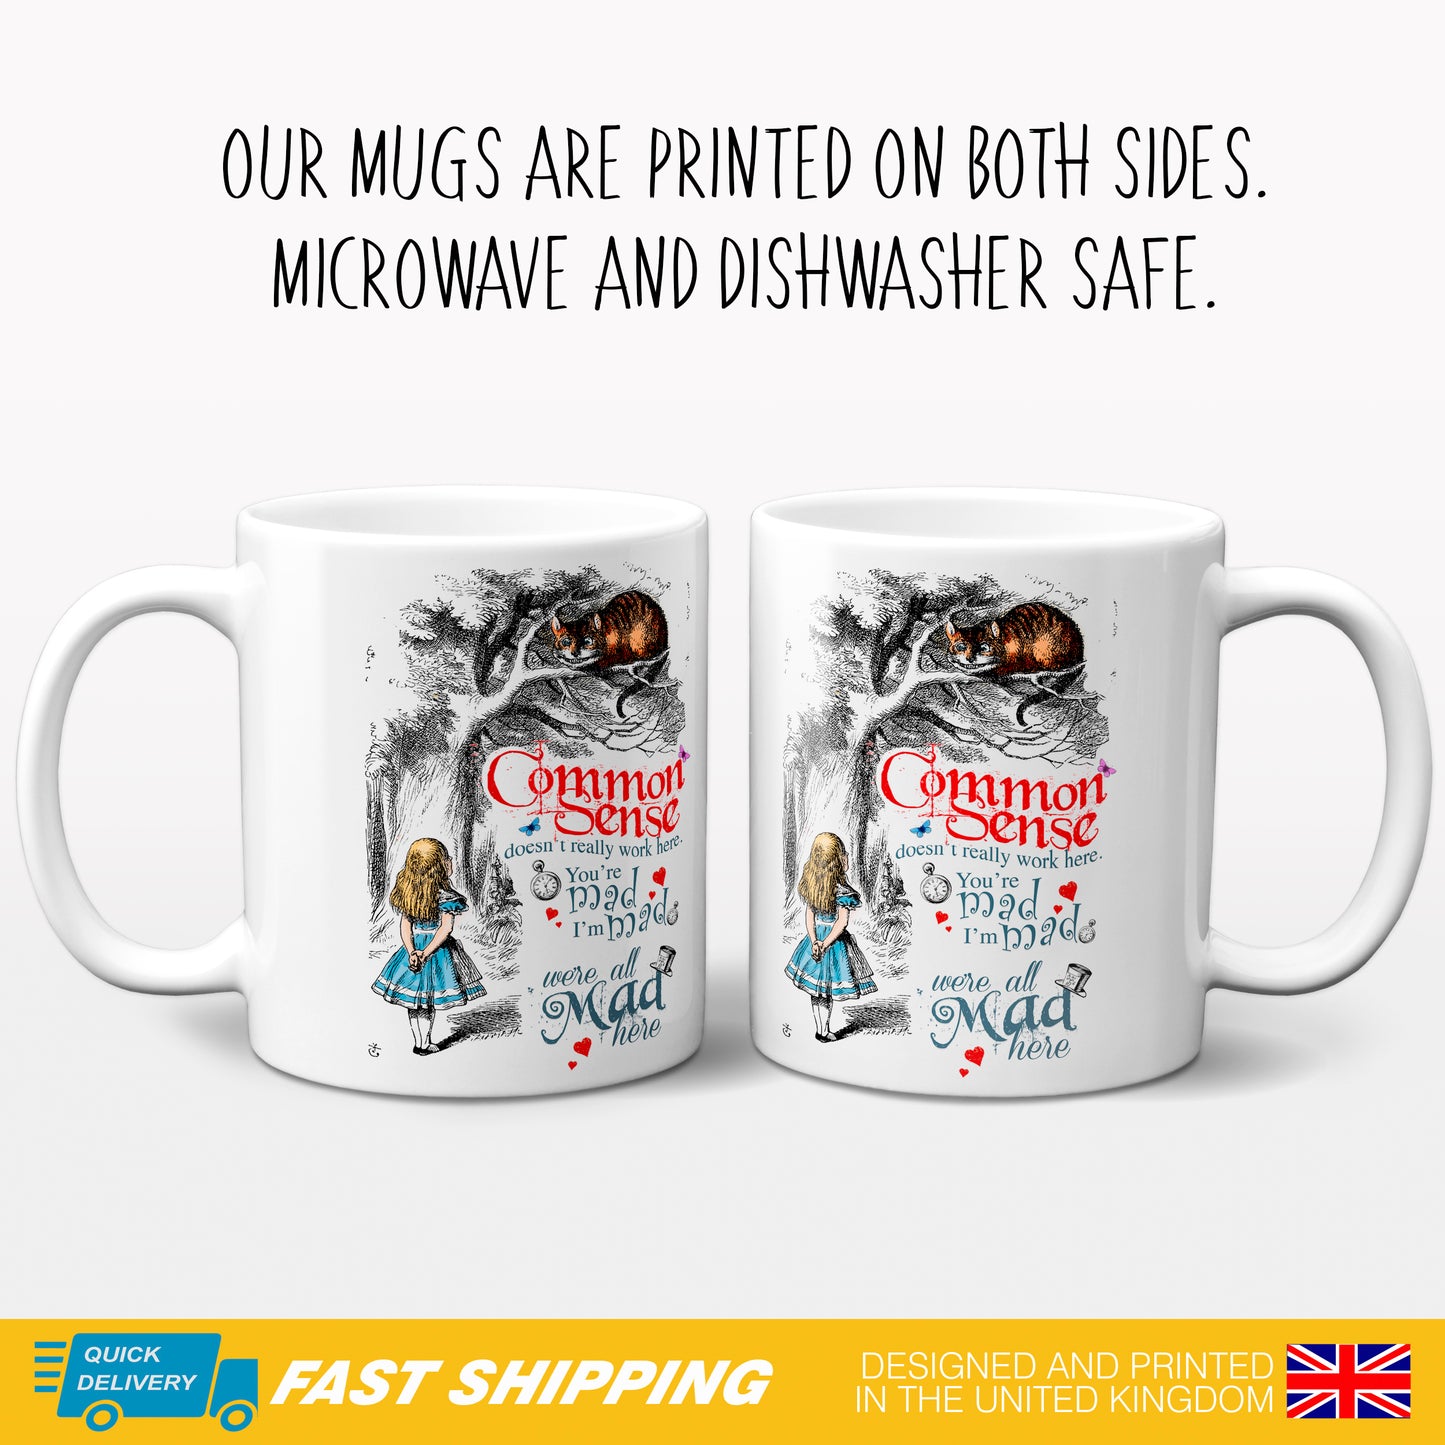 Alice in Wonderland Mug gift depicting Alice and the Cheshire Cat with the phrase 'Common Sense doesn't really work here. You're mad, I'm Mad, We're all mad here' showing 2 mugs with front and back artwork